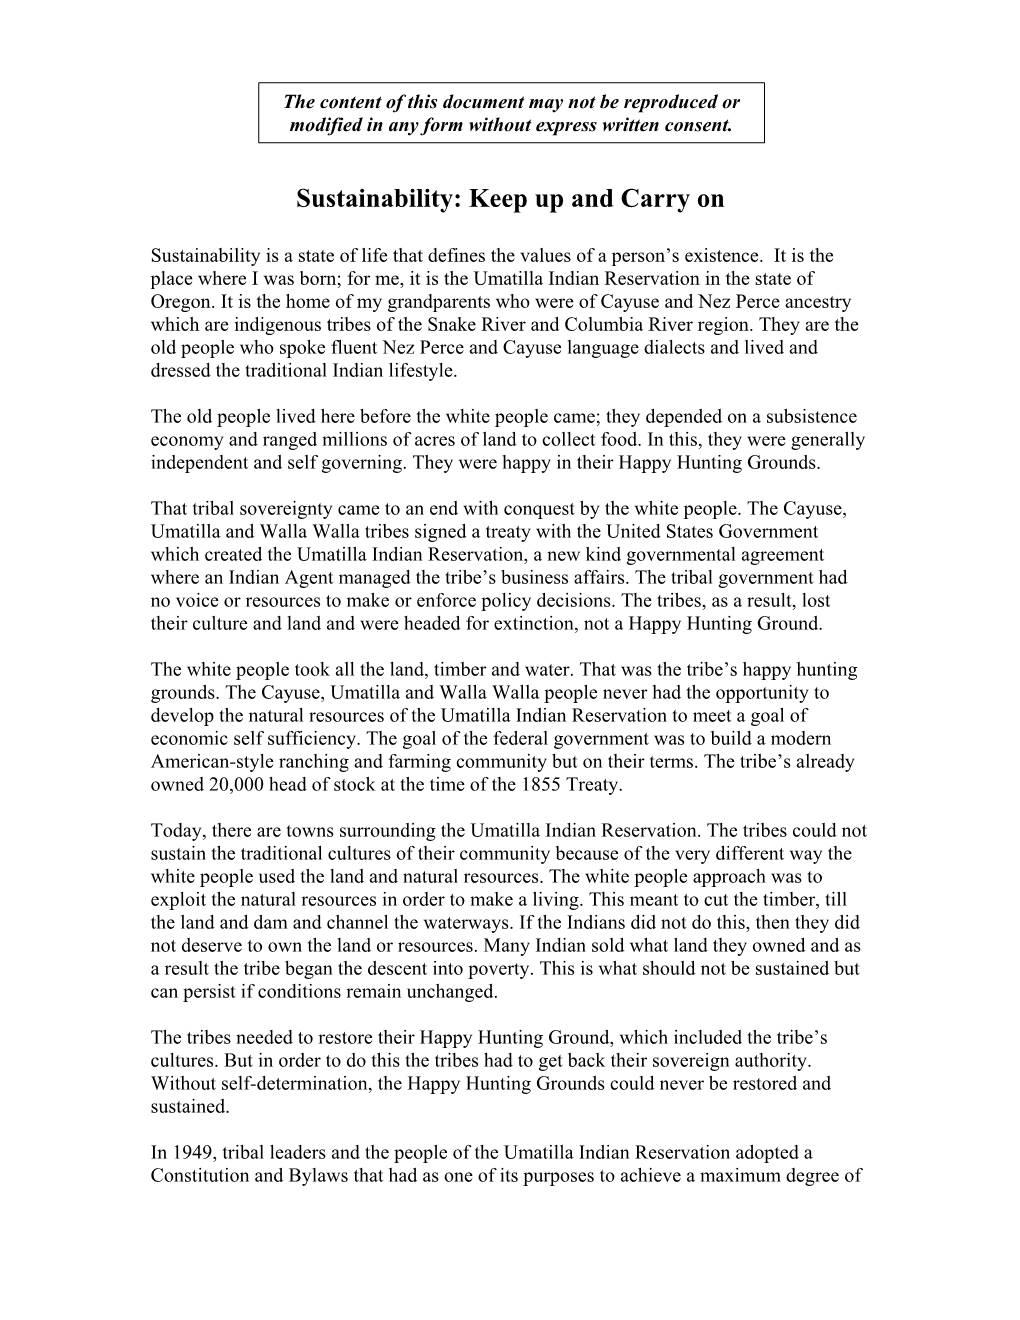 Sustainability: Keep up and Carry On